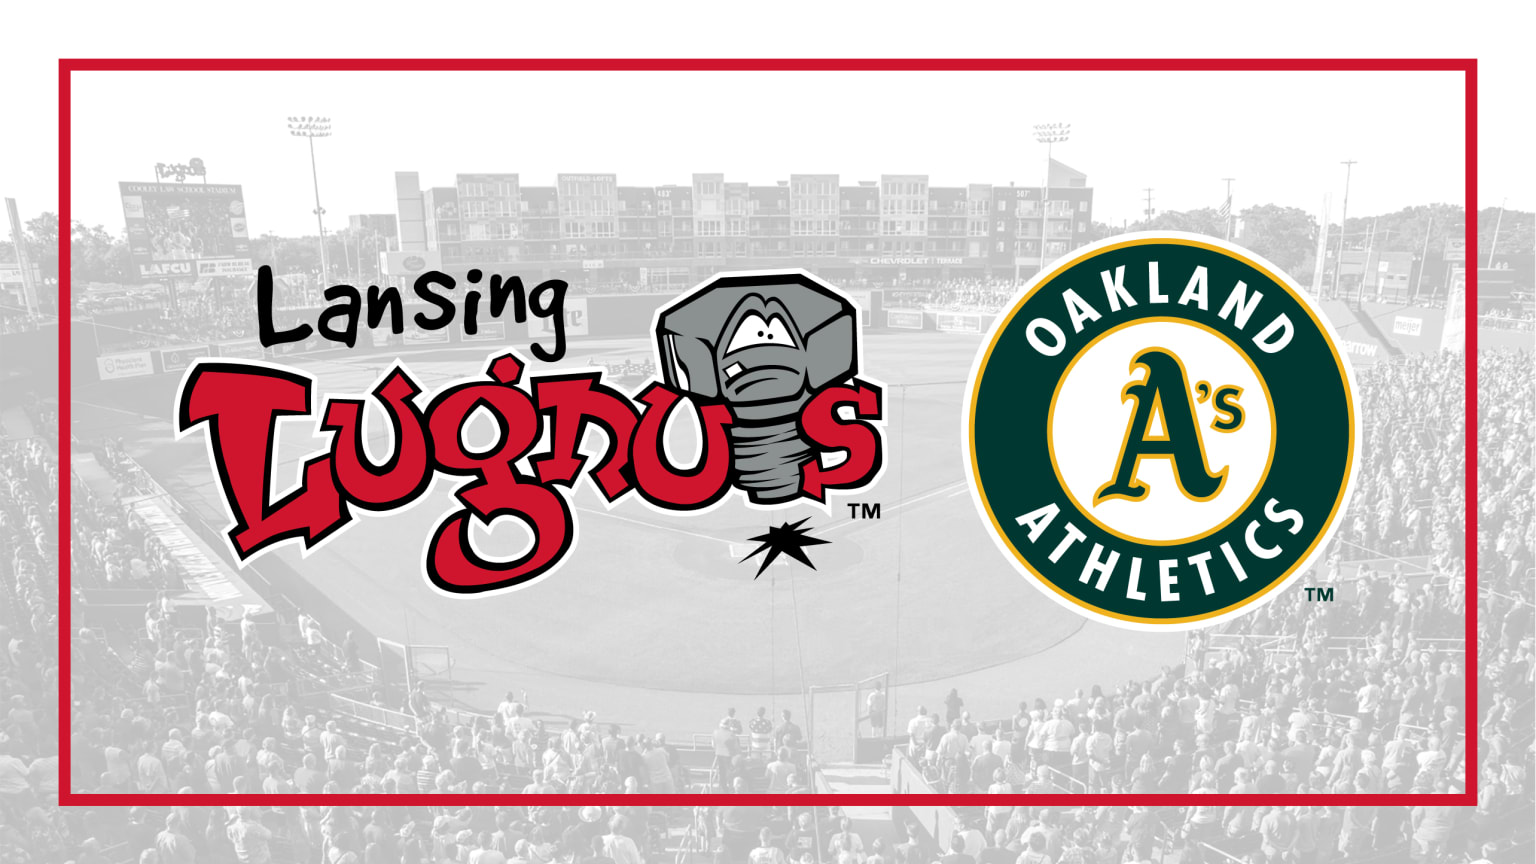 The Lansing Lugnuts have a new name honoring Latin heritage